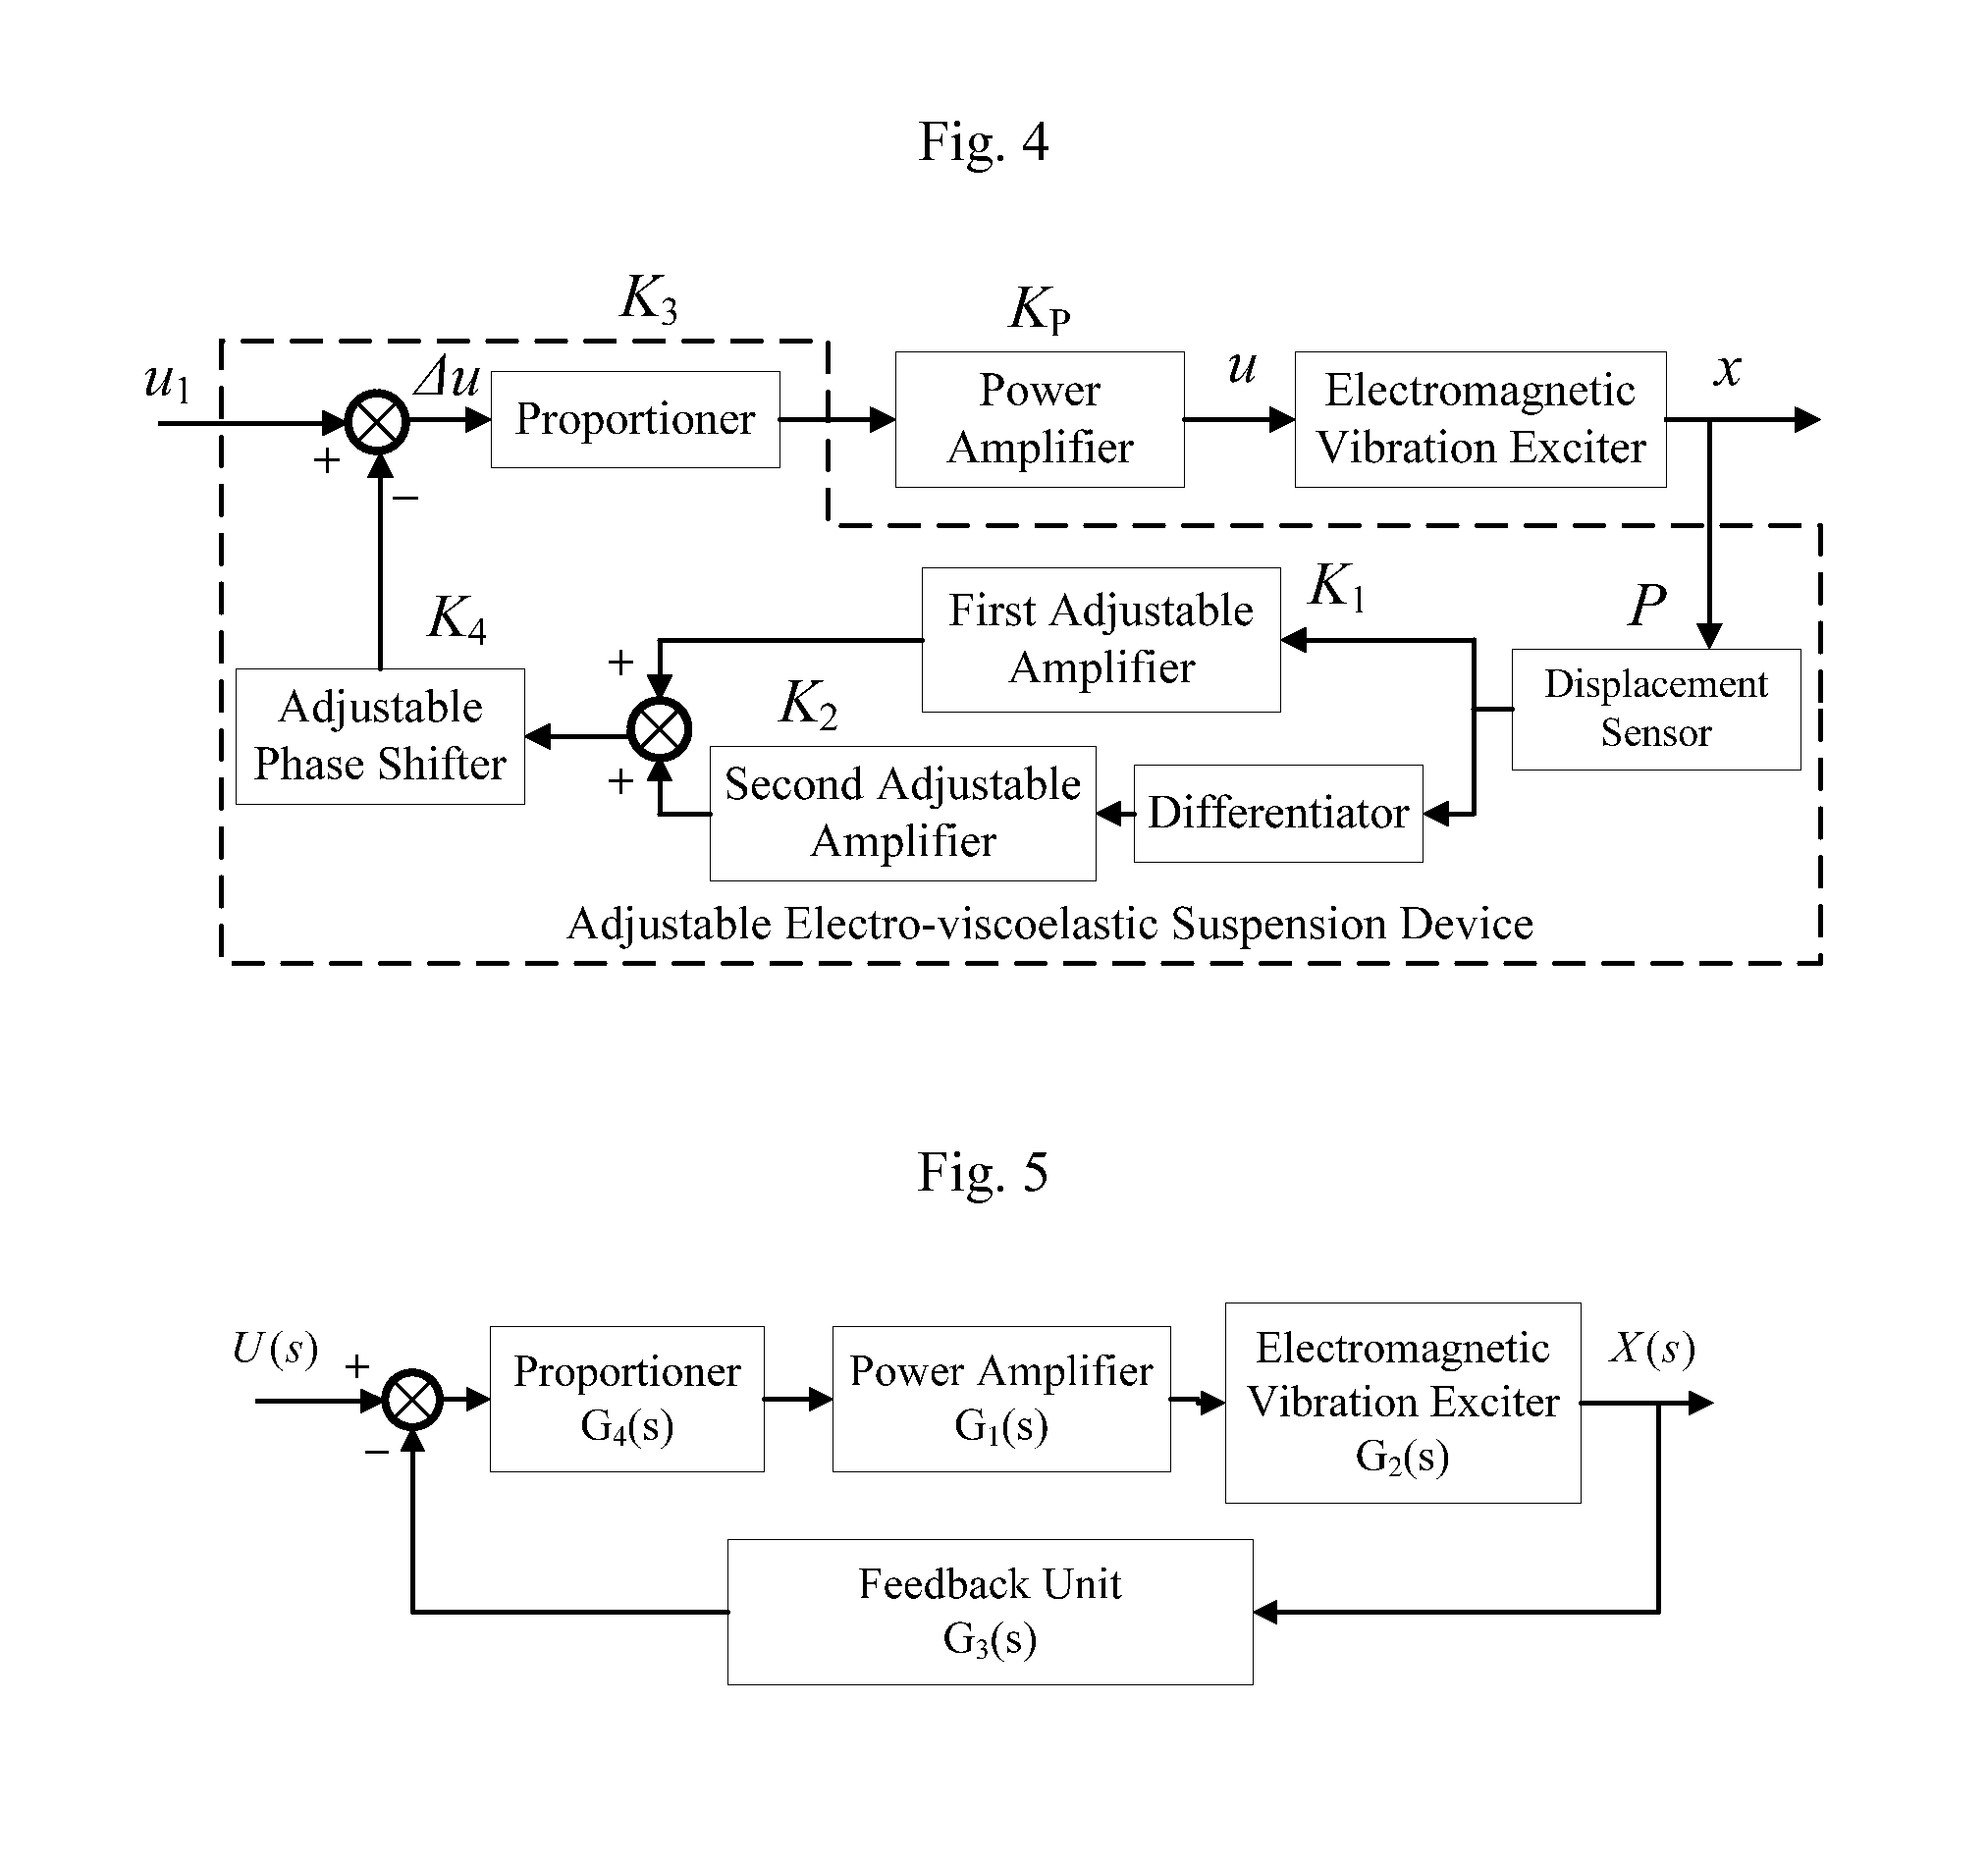 Electromagnetic vibration exciter system with adjustable electro-viscoelastic suspension device